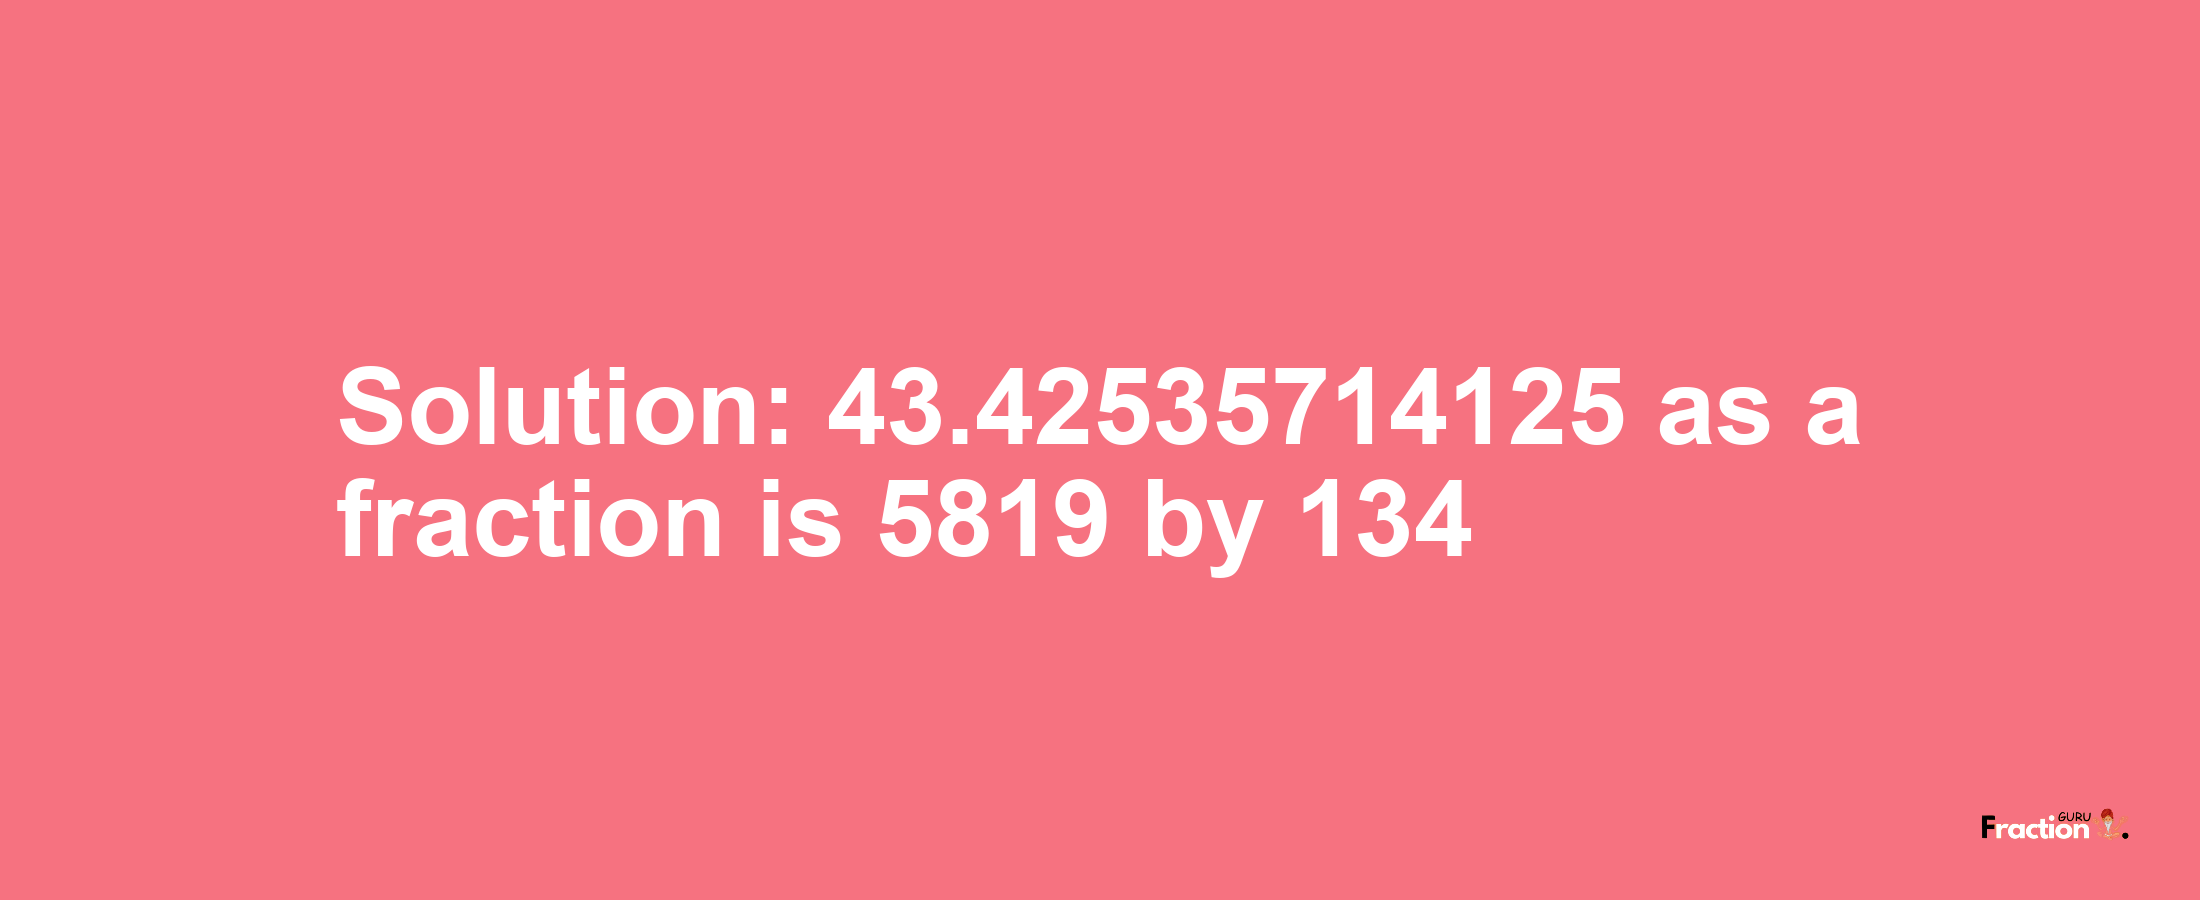 Solution:43.42535714125 as a fraction is 5819/134